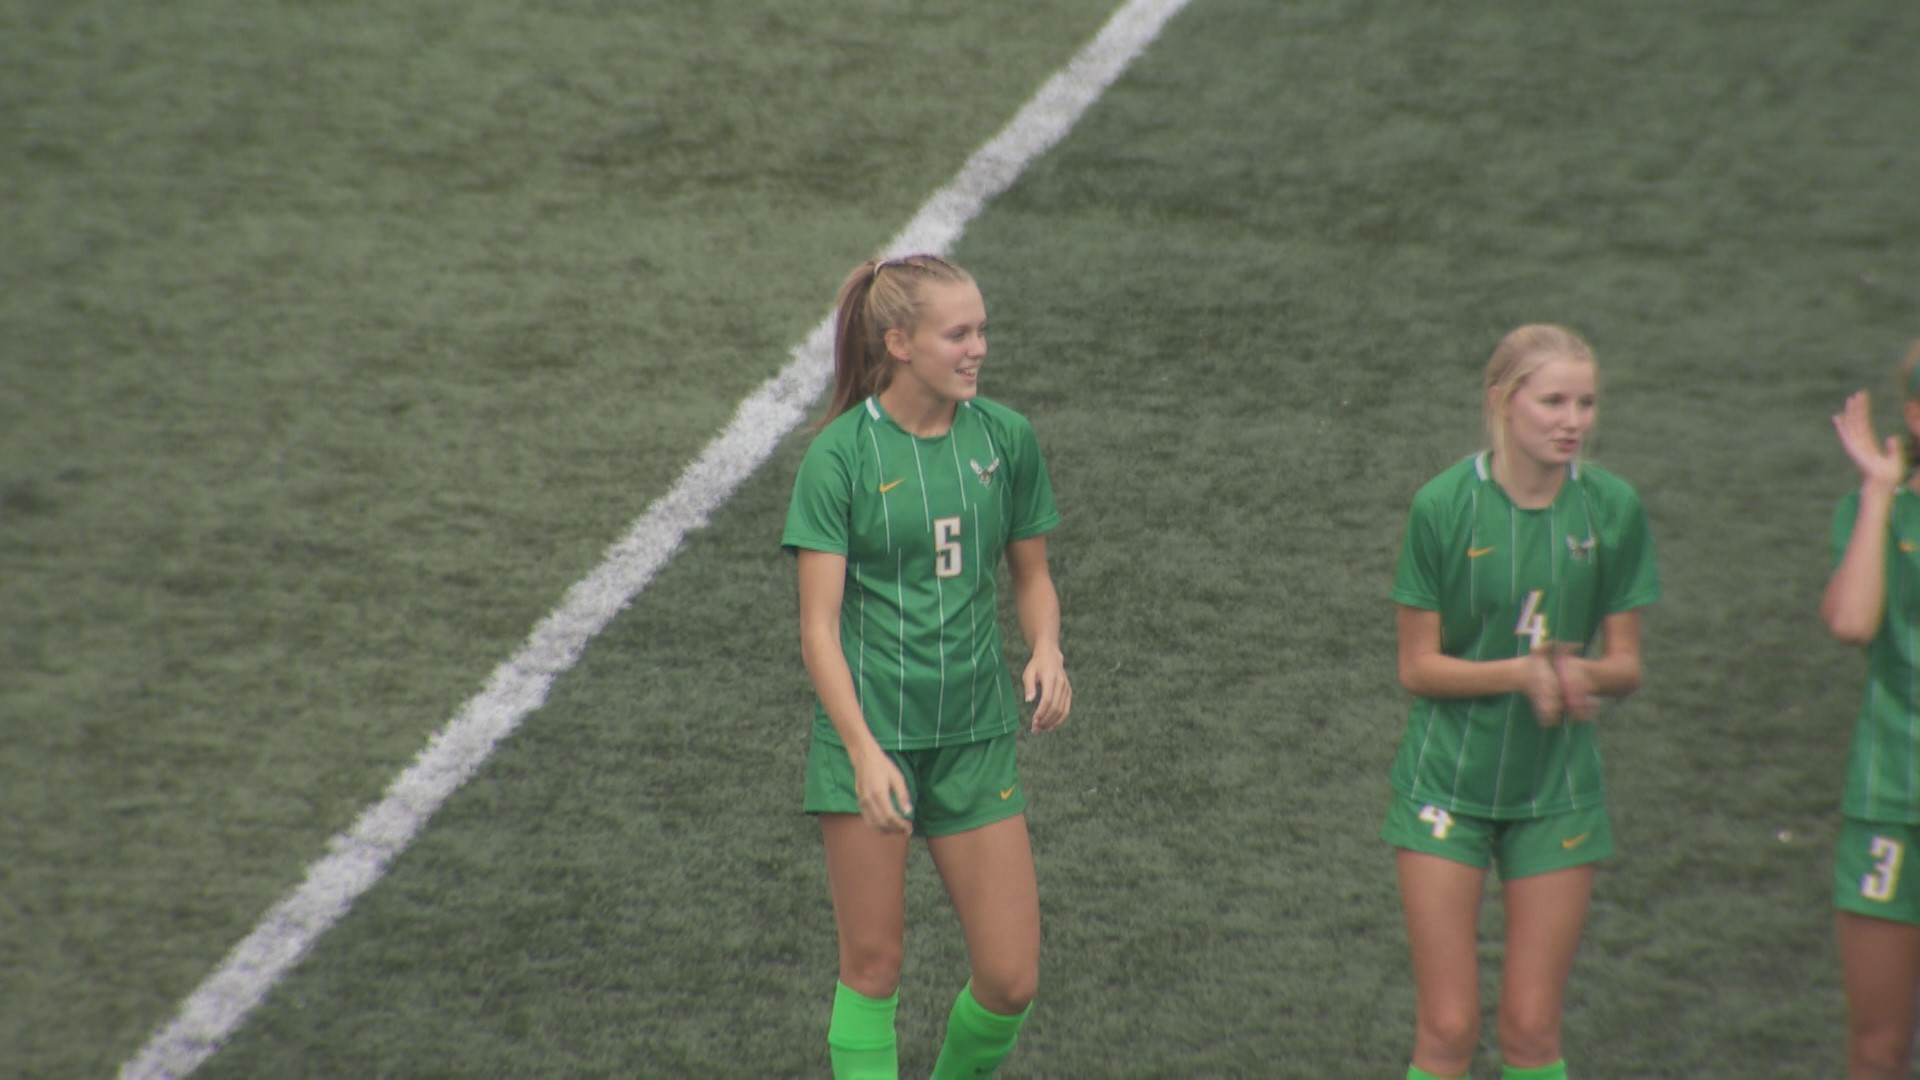 Minnesota's Ms. Soccer has scored 33 goals so far this season and is looking to add more as the Hornets push for a state championship.